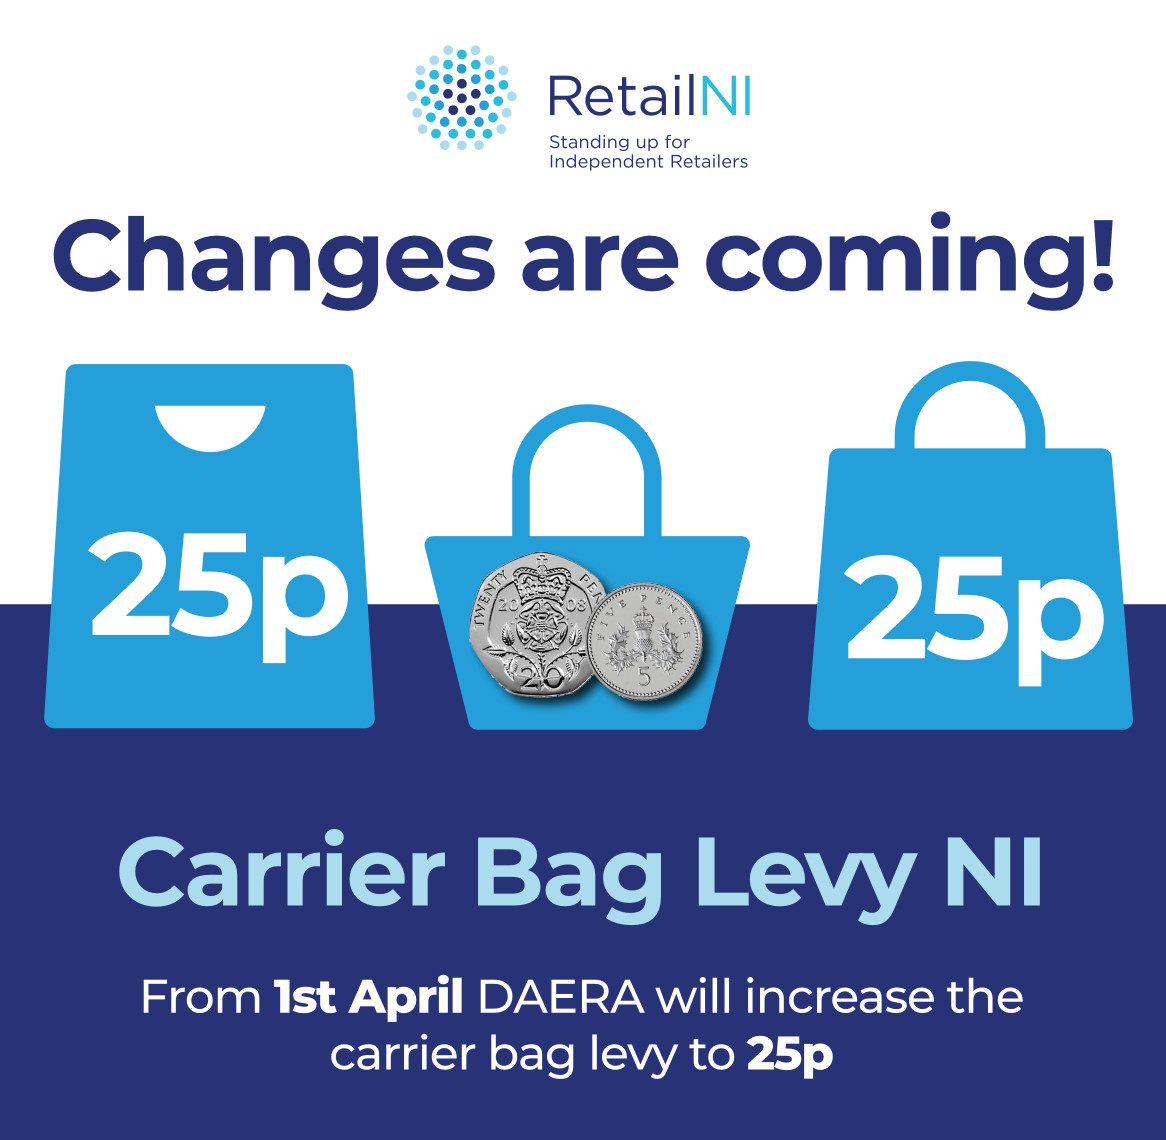 Retail NI Issue Reminder To Shoppers On Carrier Bag Levy